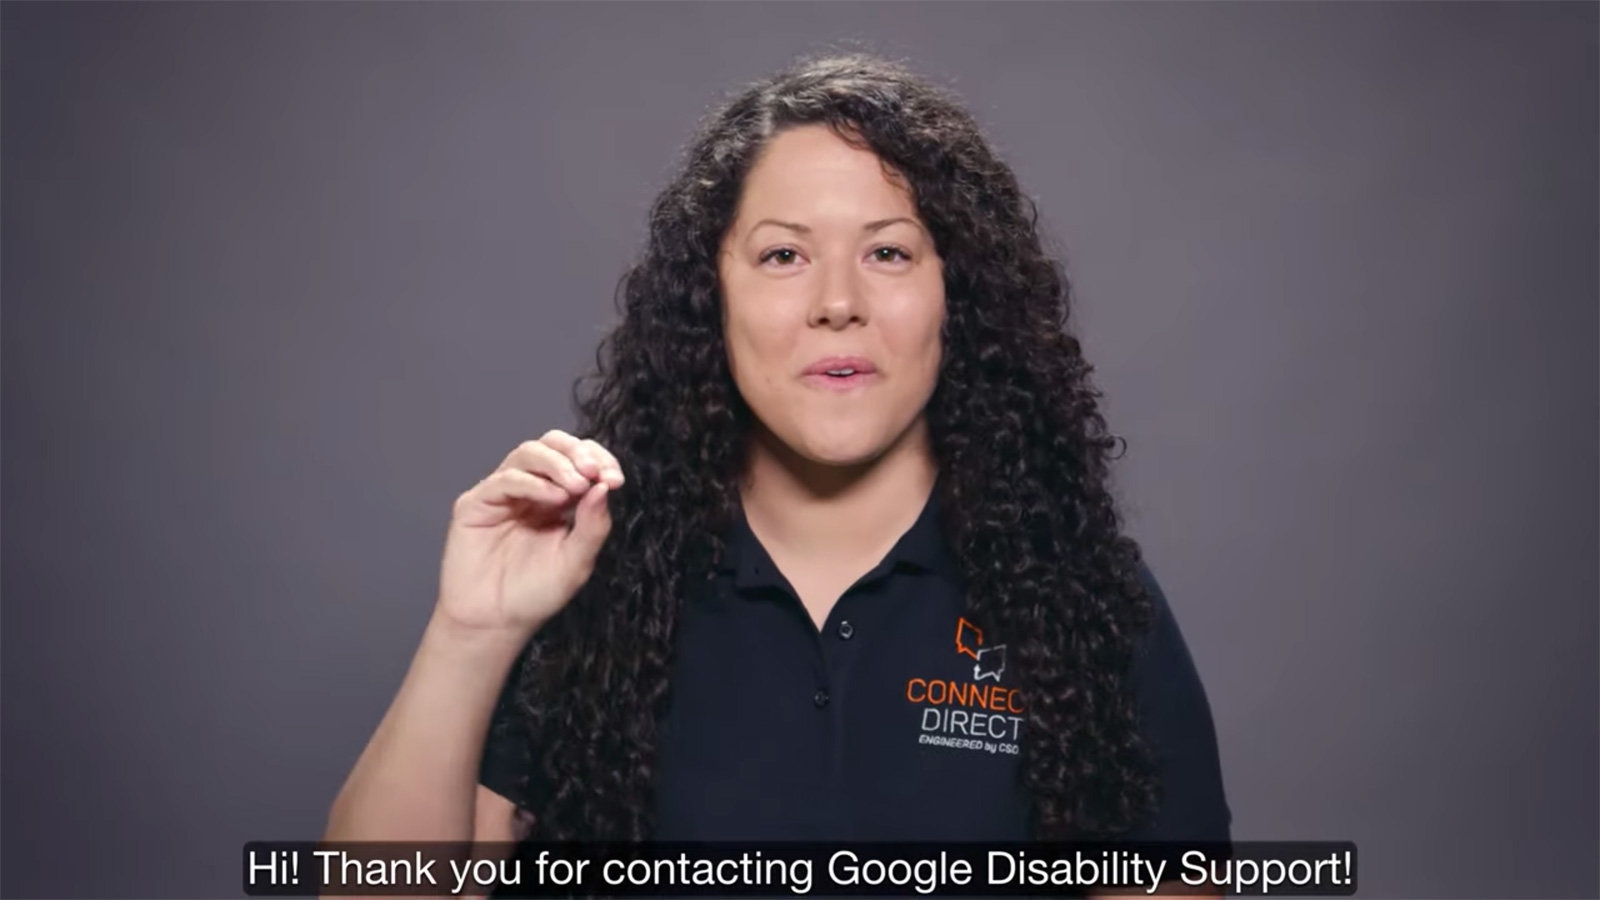 Google Disability Support is more accessible with sign language specialists | DeviceDaily.com